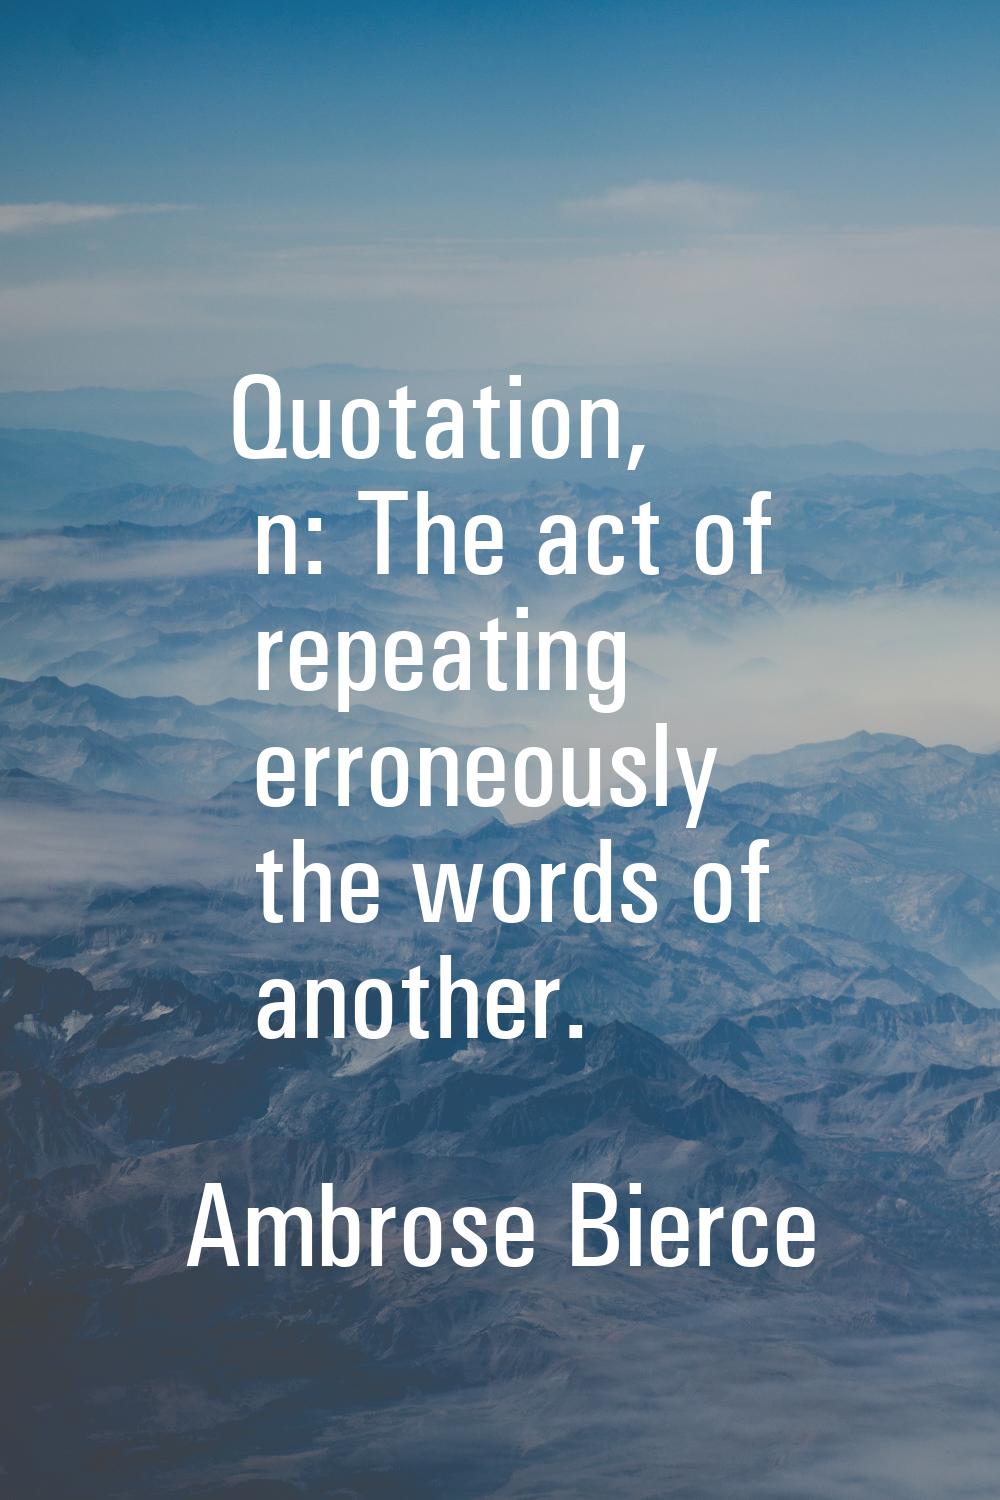 Quotation, n: The act of repeating erroneously the words of another.